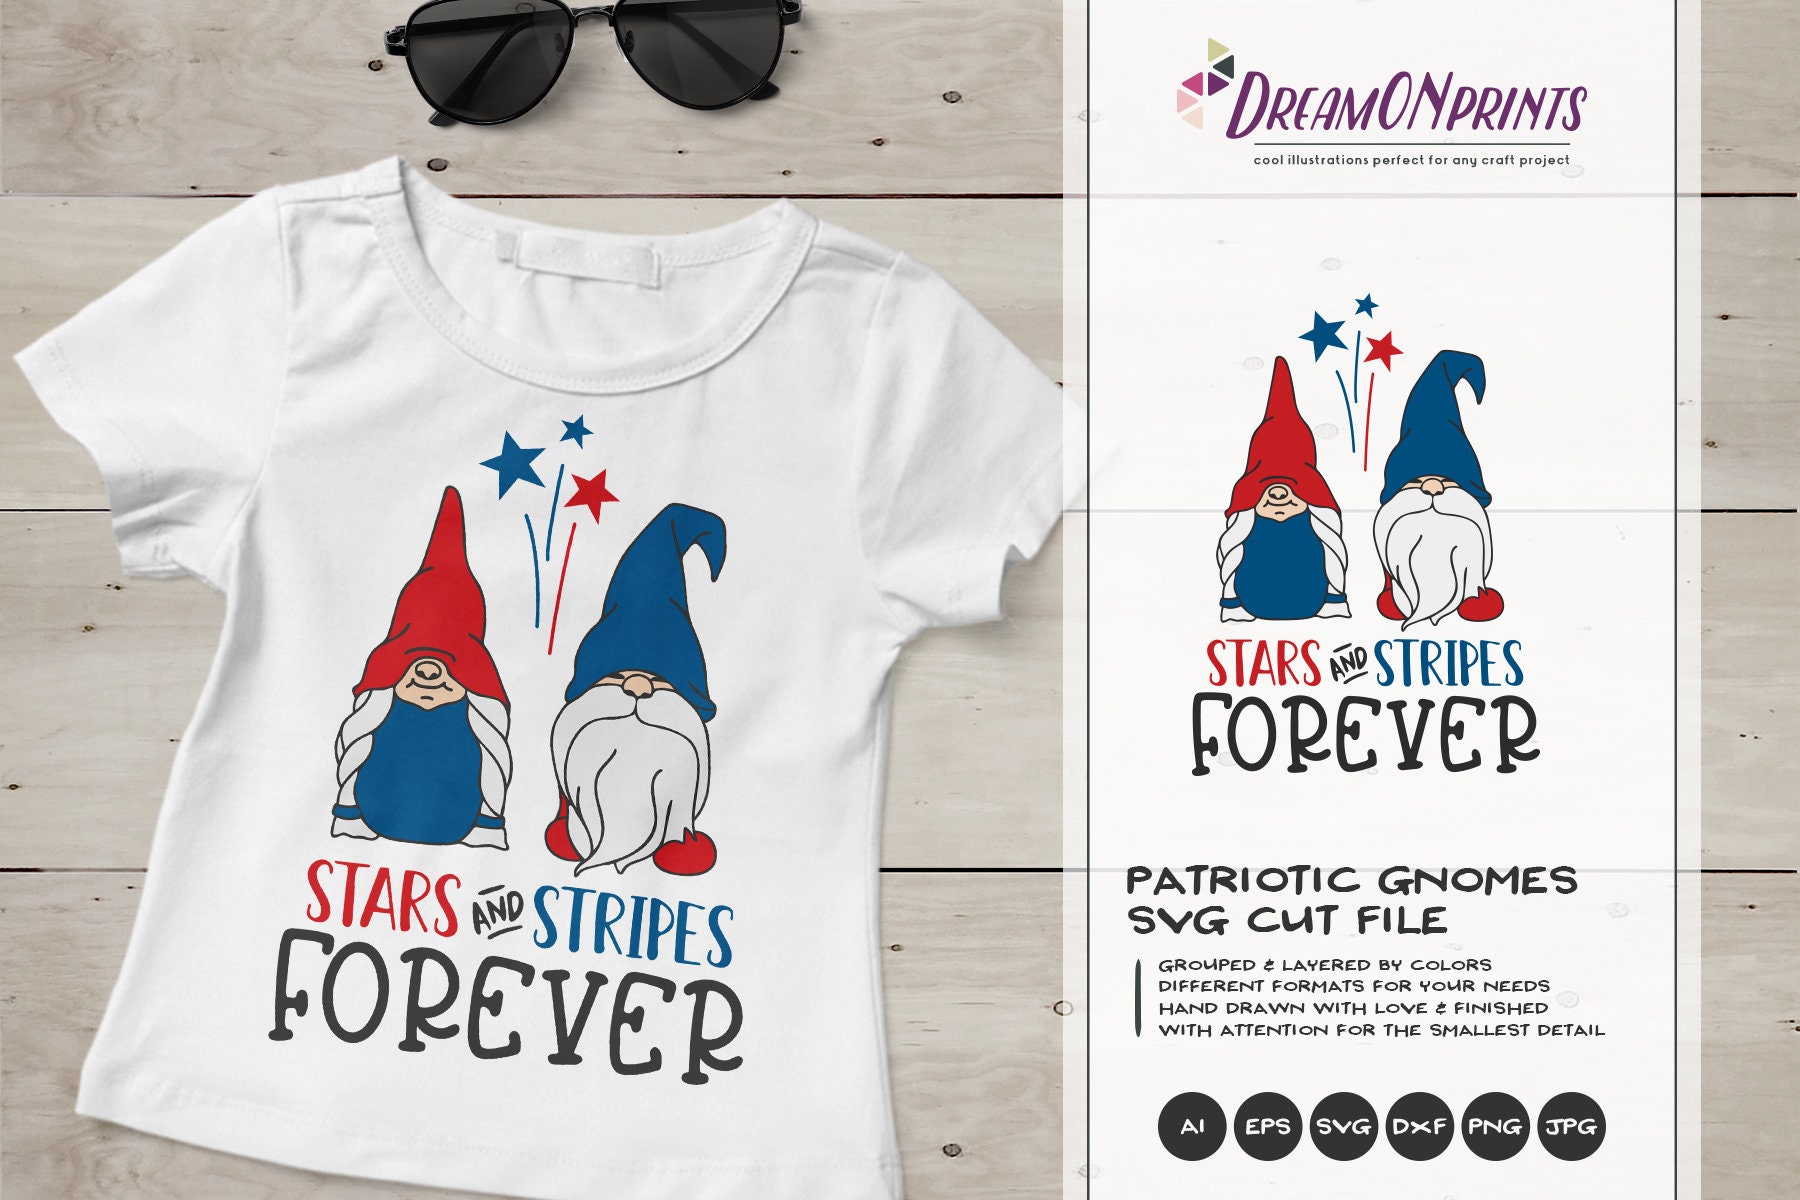 Download Happy 4th of July | Cute Patriotic SVG Bundle for Shirts ...